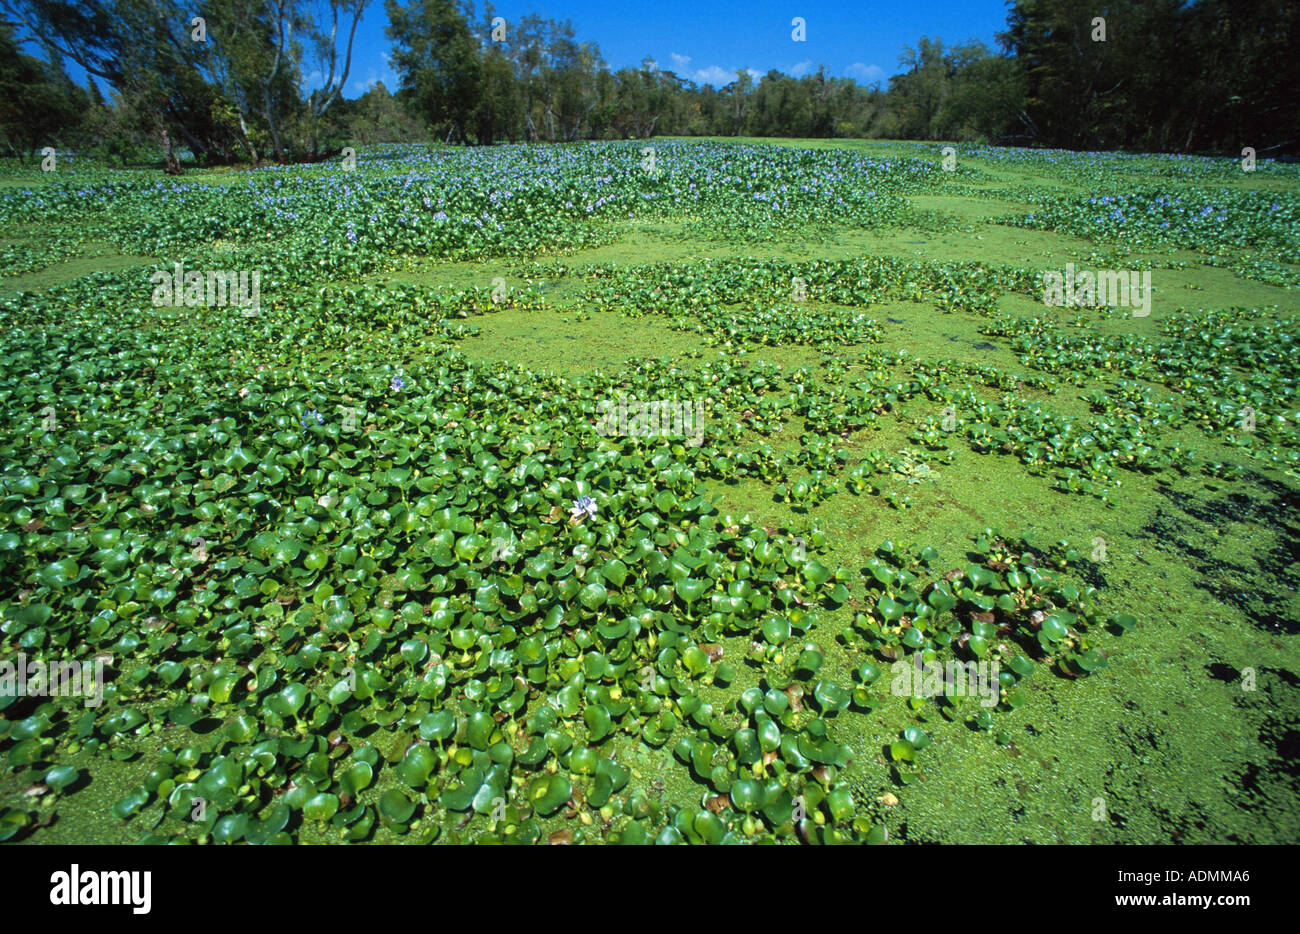 waterhyacinth, common water-hyacinth (Eichhornia crassipes), covering the whole surface of a pond Stock Photo